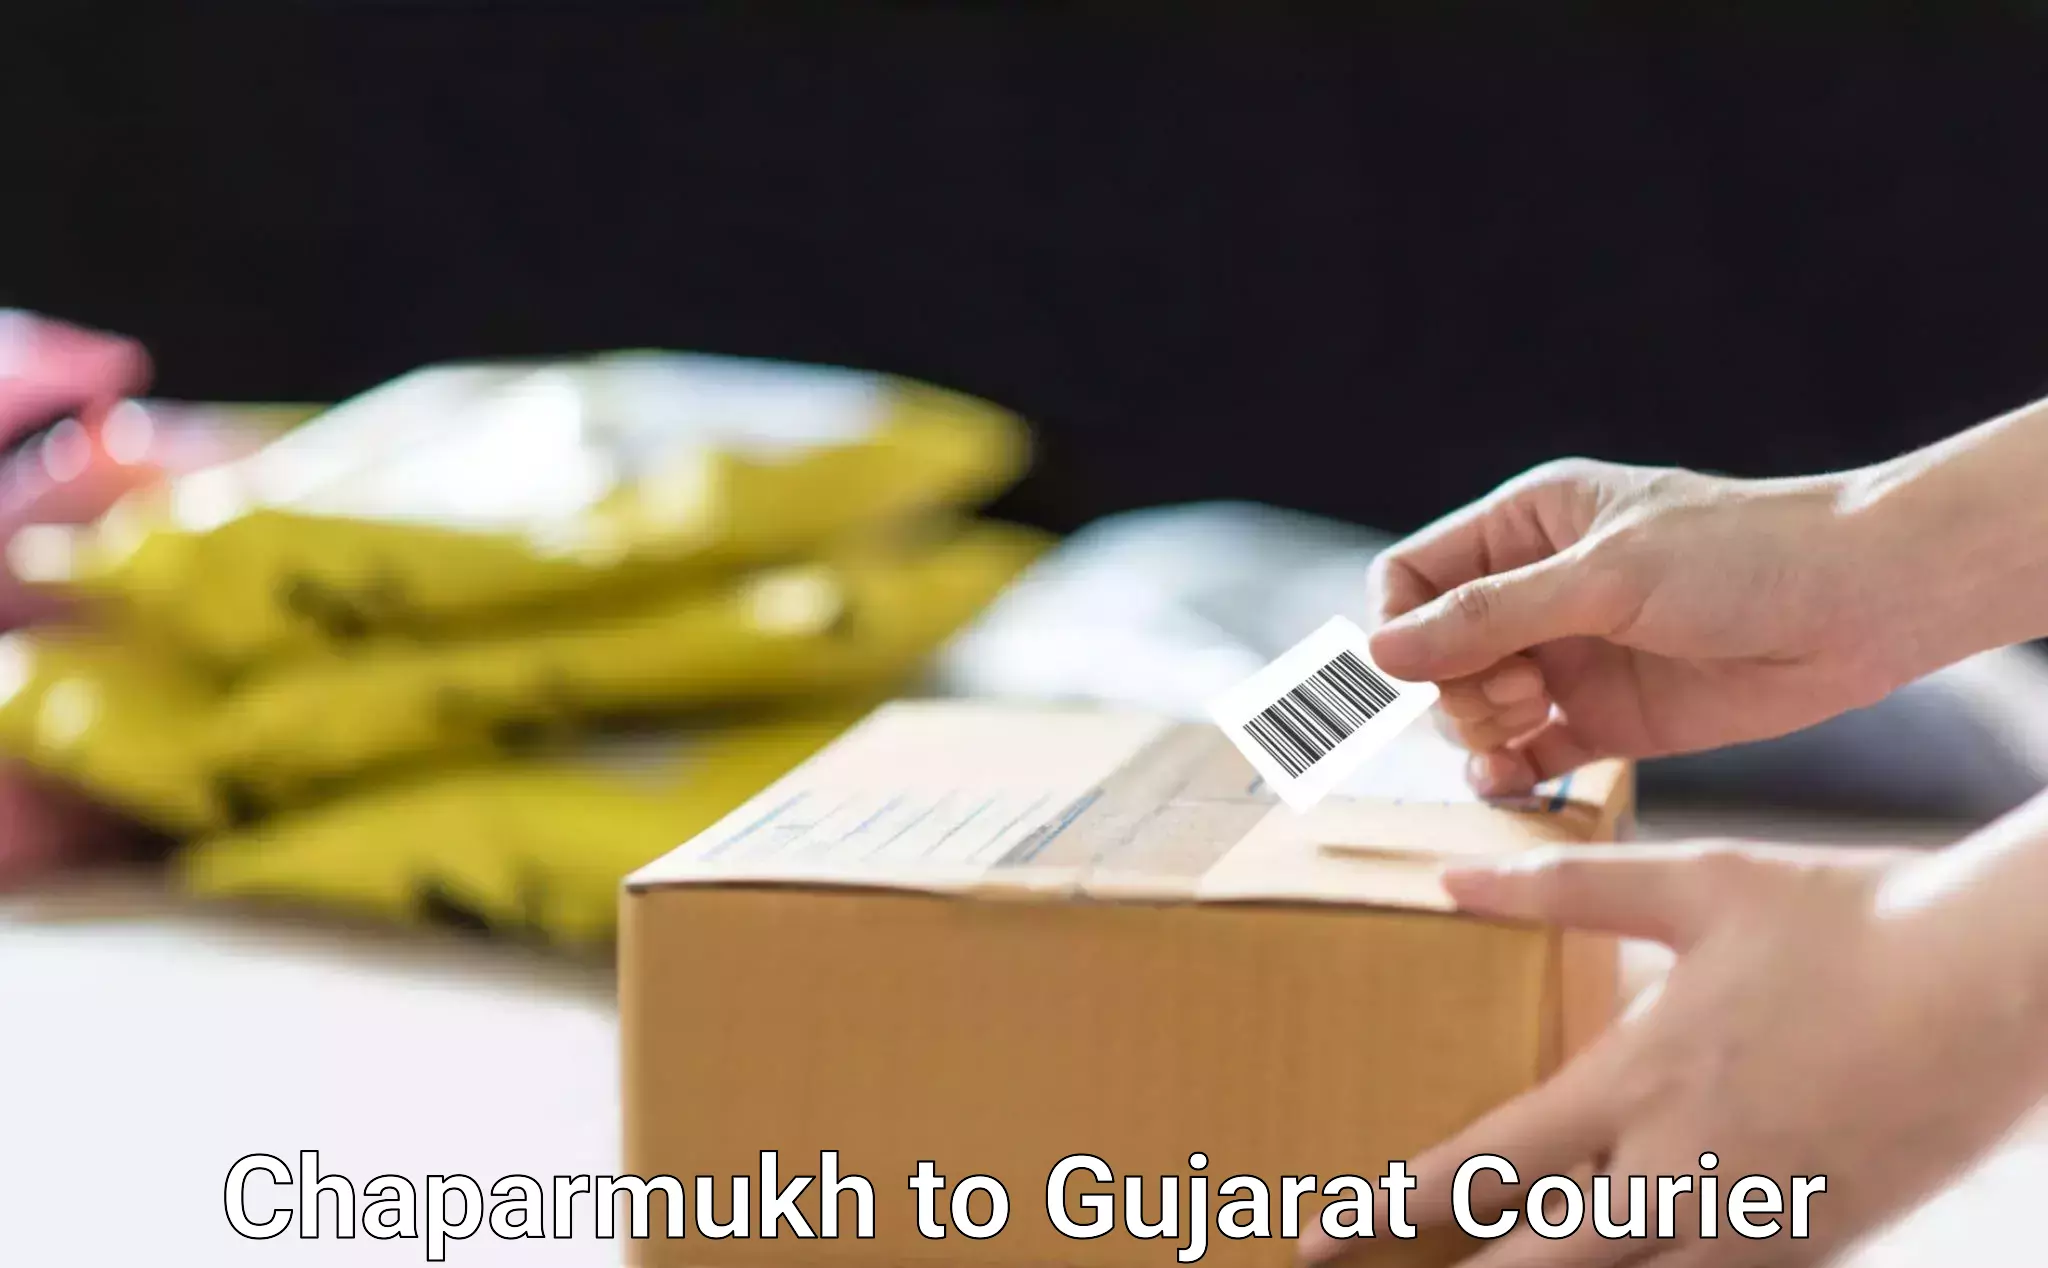 Expedited shipping solutions Chaparmukh to Botad